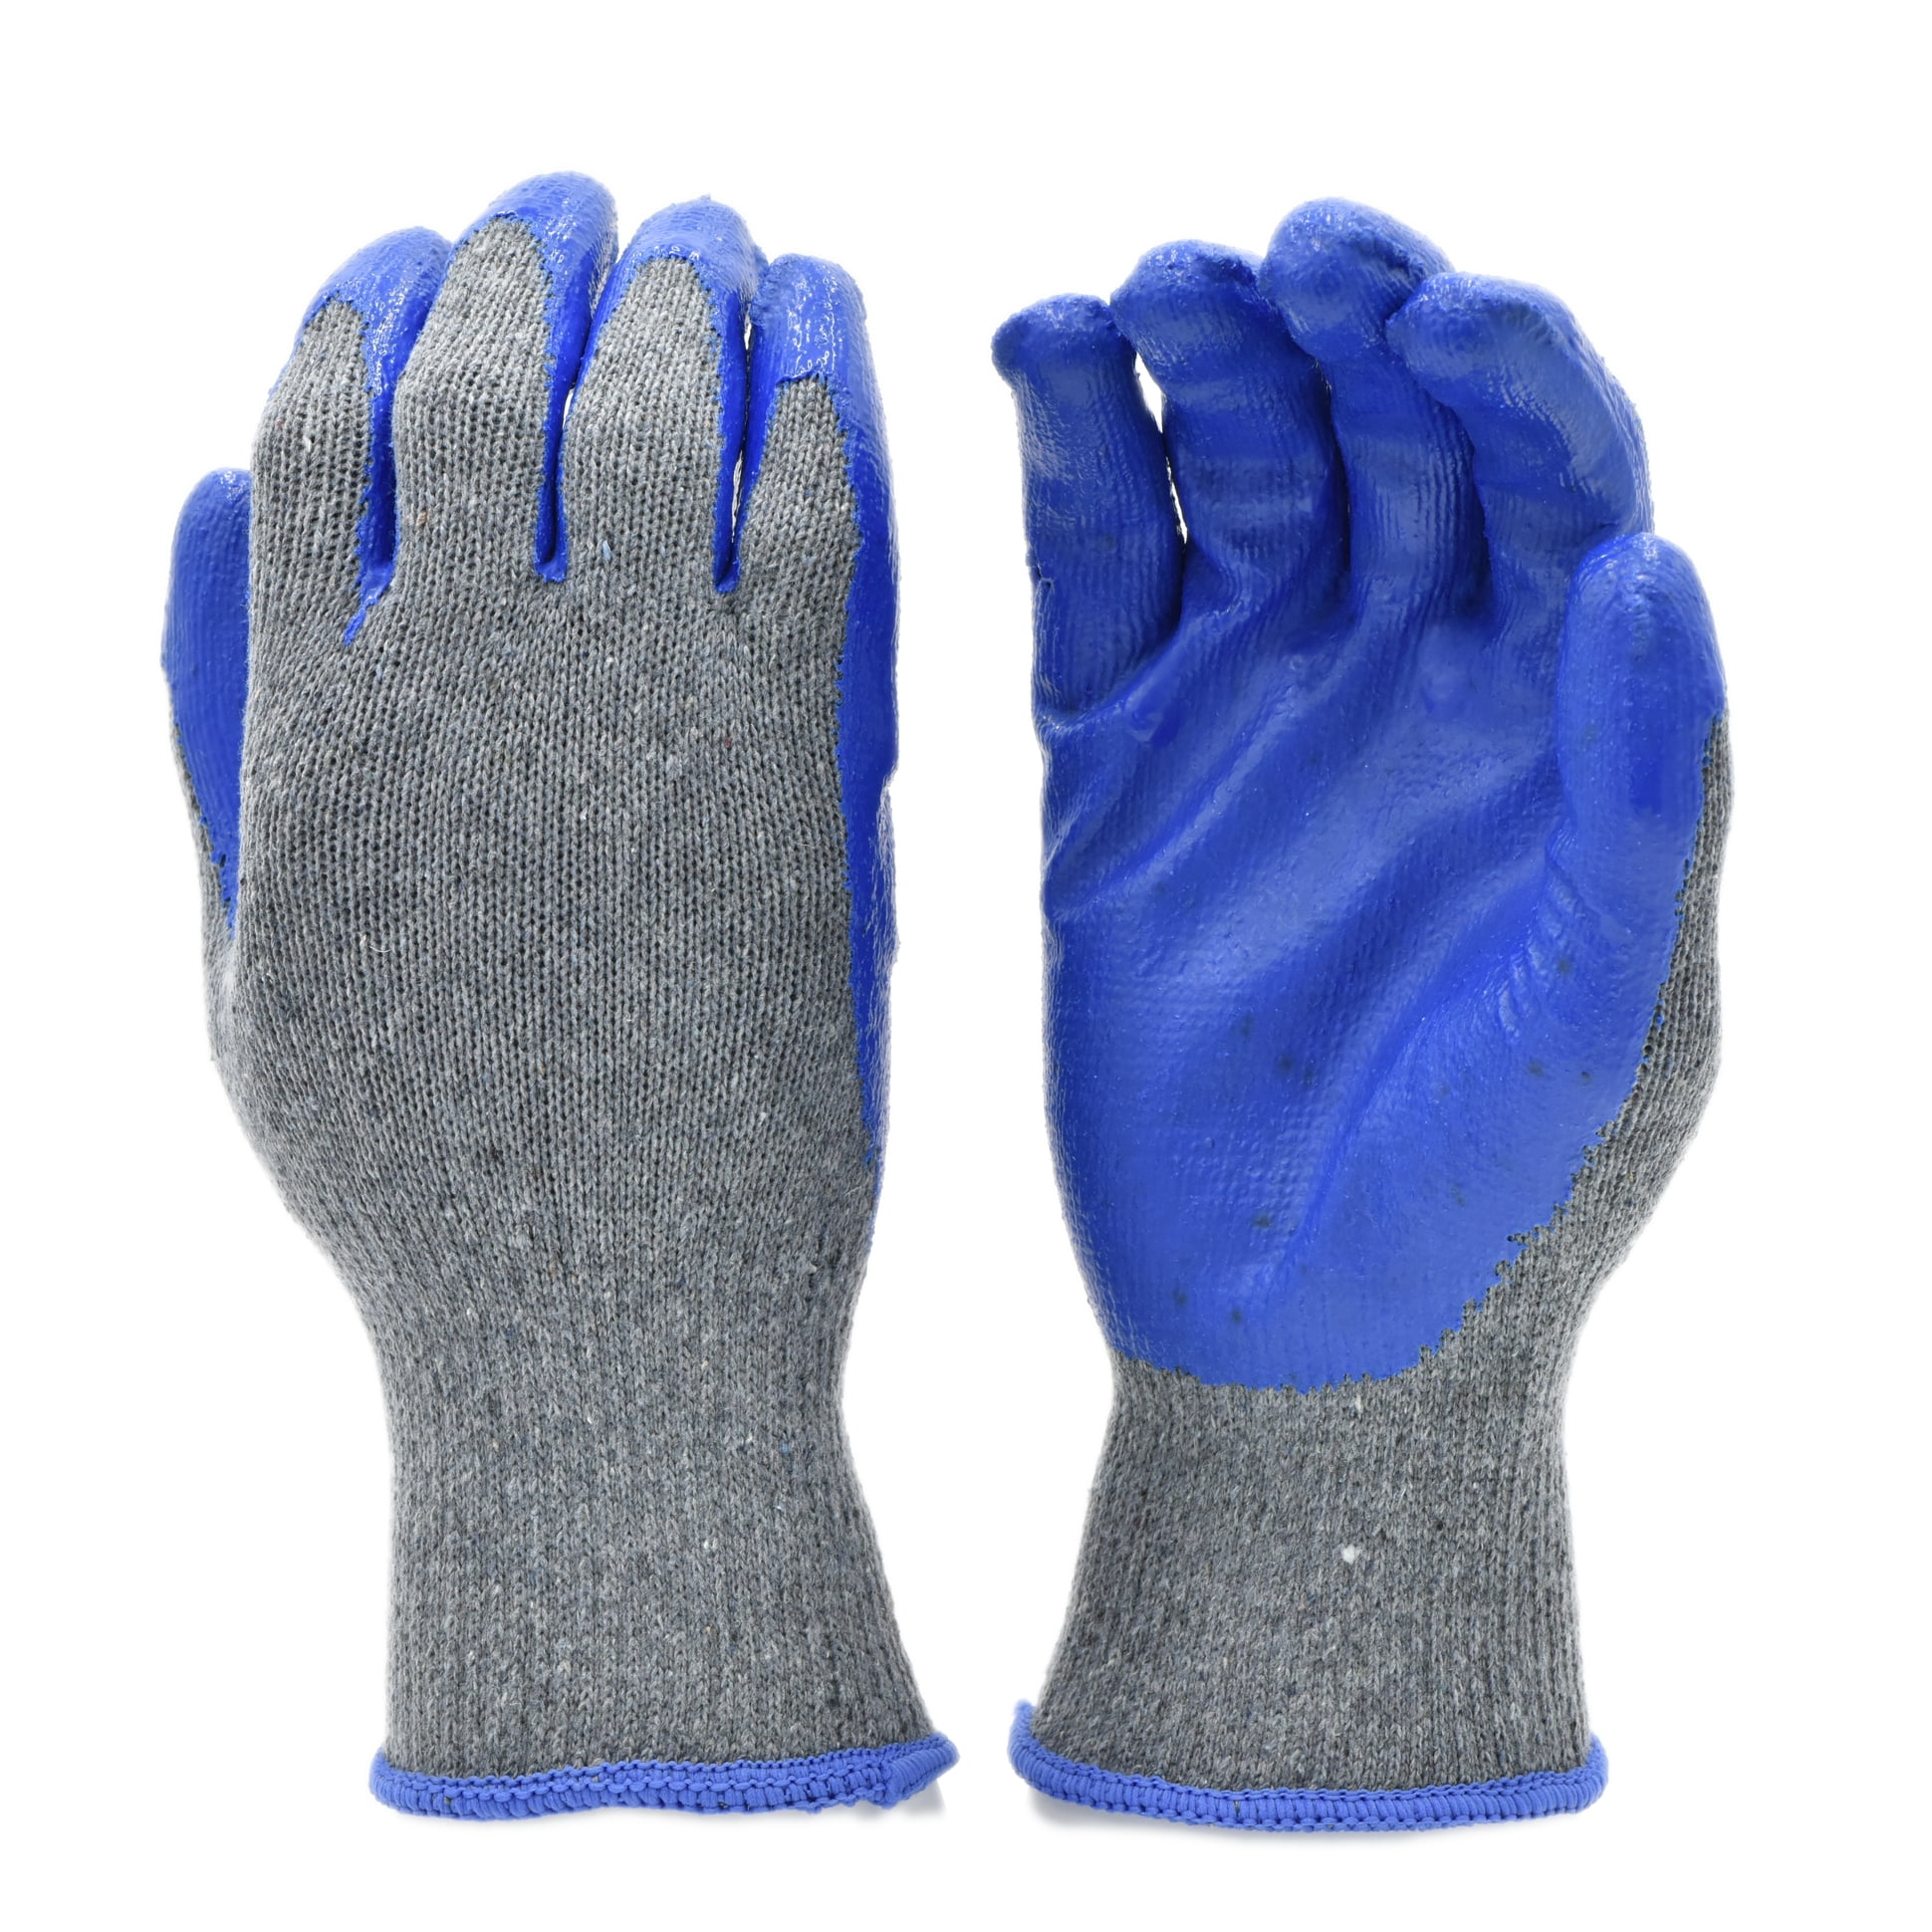 Dropship AMZ Blue Gray Knit Gloves 10 L Size. Pack Of 480 Work Cotton  Gloves For